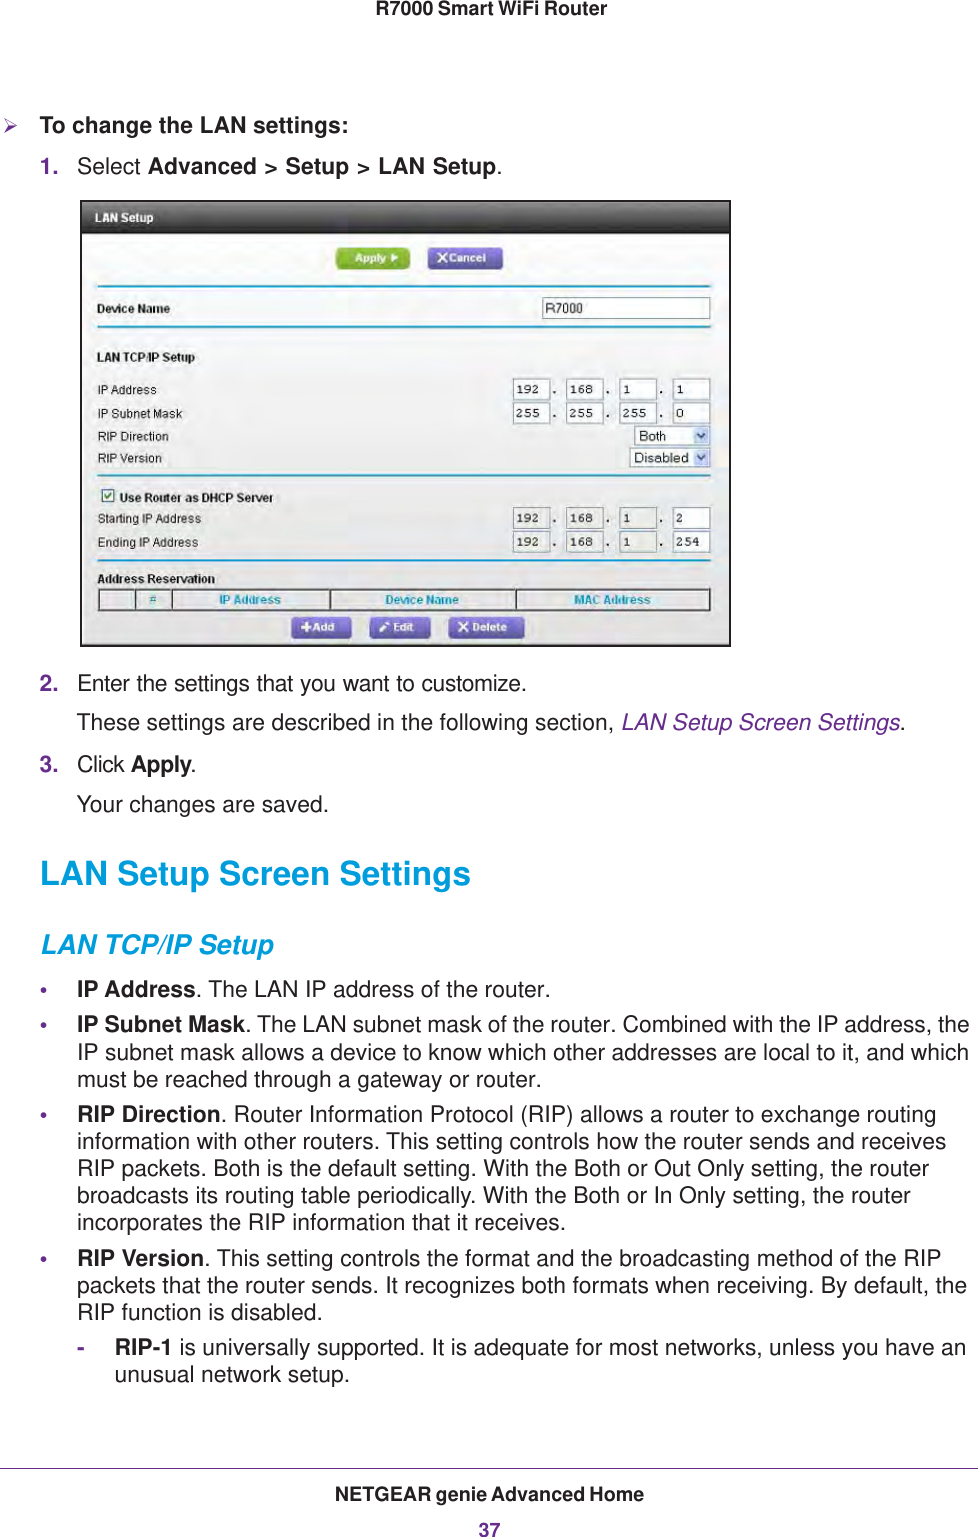 NETGEAR genie Advanced Home37 R7000 Smart WiFi RouterTo change the LAN settings:1. Select Advanced &gt; Setup &gt; LAN Setup.2. Enter the settings that you want to customize. These settings are described in the following section, LAN Setup Screen Settings.3. Click Apply.Your changes are saved.LAN Setup Screen SettingsLAN TCP/IP Setup•IP Address. The LAN IP address of the router.•IP Subnet Mask. The LAN subnet mask of the router. Combined with the IP address, the IP subnet mask allows a device to know which other addresses are local to it, and which must be reached through a gateway or router.•RIP Direction. Router Information Protocol (RIP) allows a router to exchange routing information with other routers. This setting controls how the router sends and receives RIP packets. Both is the default setting. With the Both or Out Only setting, the router broadcasts its routing table periodically. With the Both or In Only setting, the router incorporates the RIP information that it receives.•RIP Version. This setting controls the format and the broadcasting method of the RIP packets that the router sends. It recognizes both formats when receiving. By default, the RIP function is disabled. -RIP-1 is universally supported. It is adequate for most networks, unless you have an unusual network setup. 